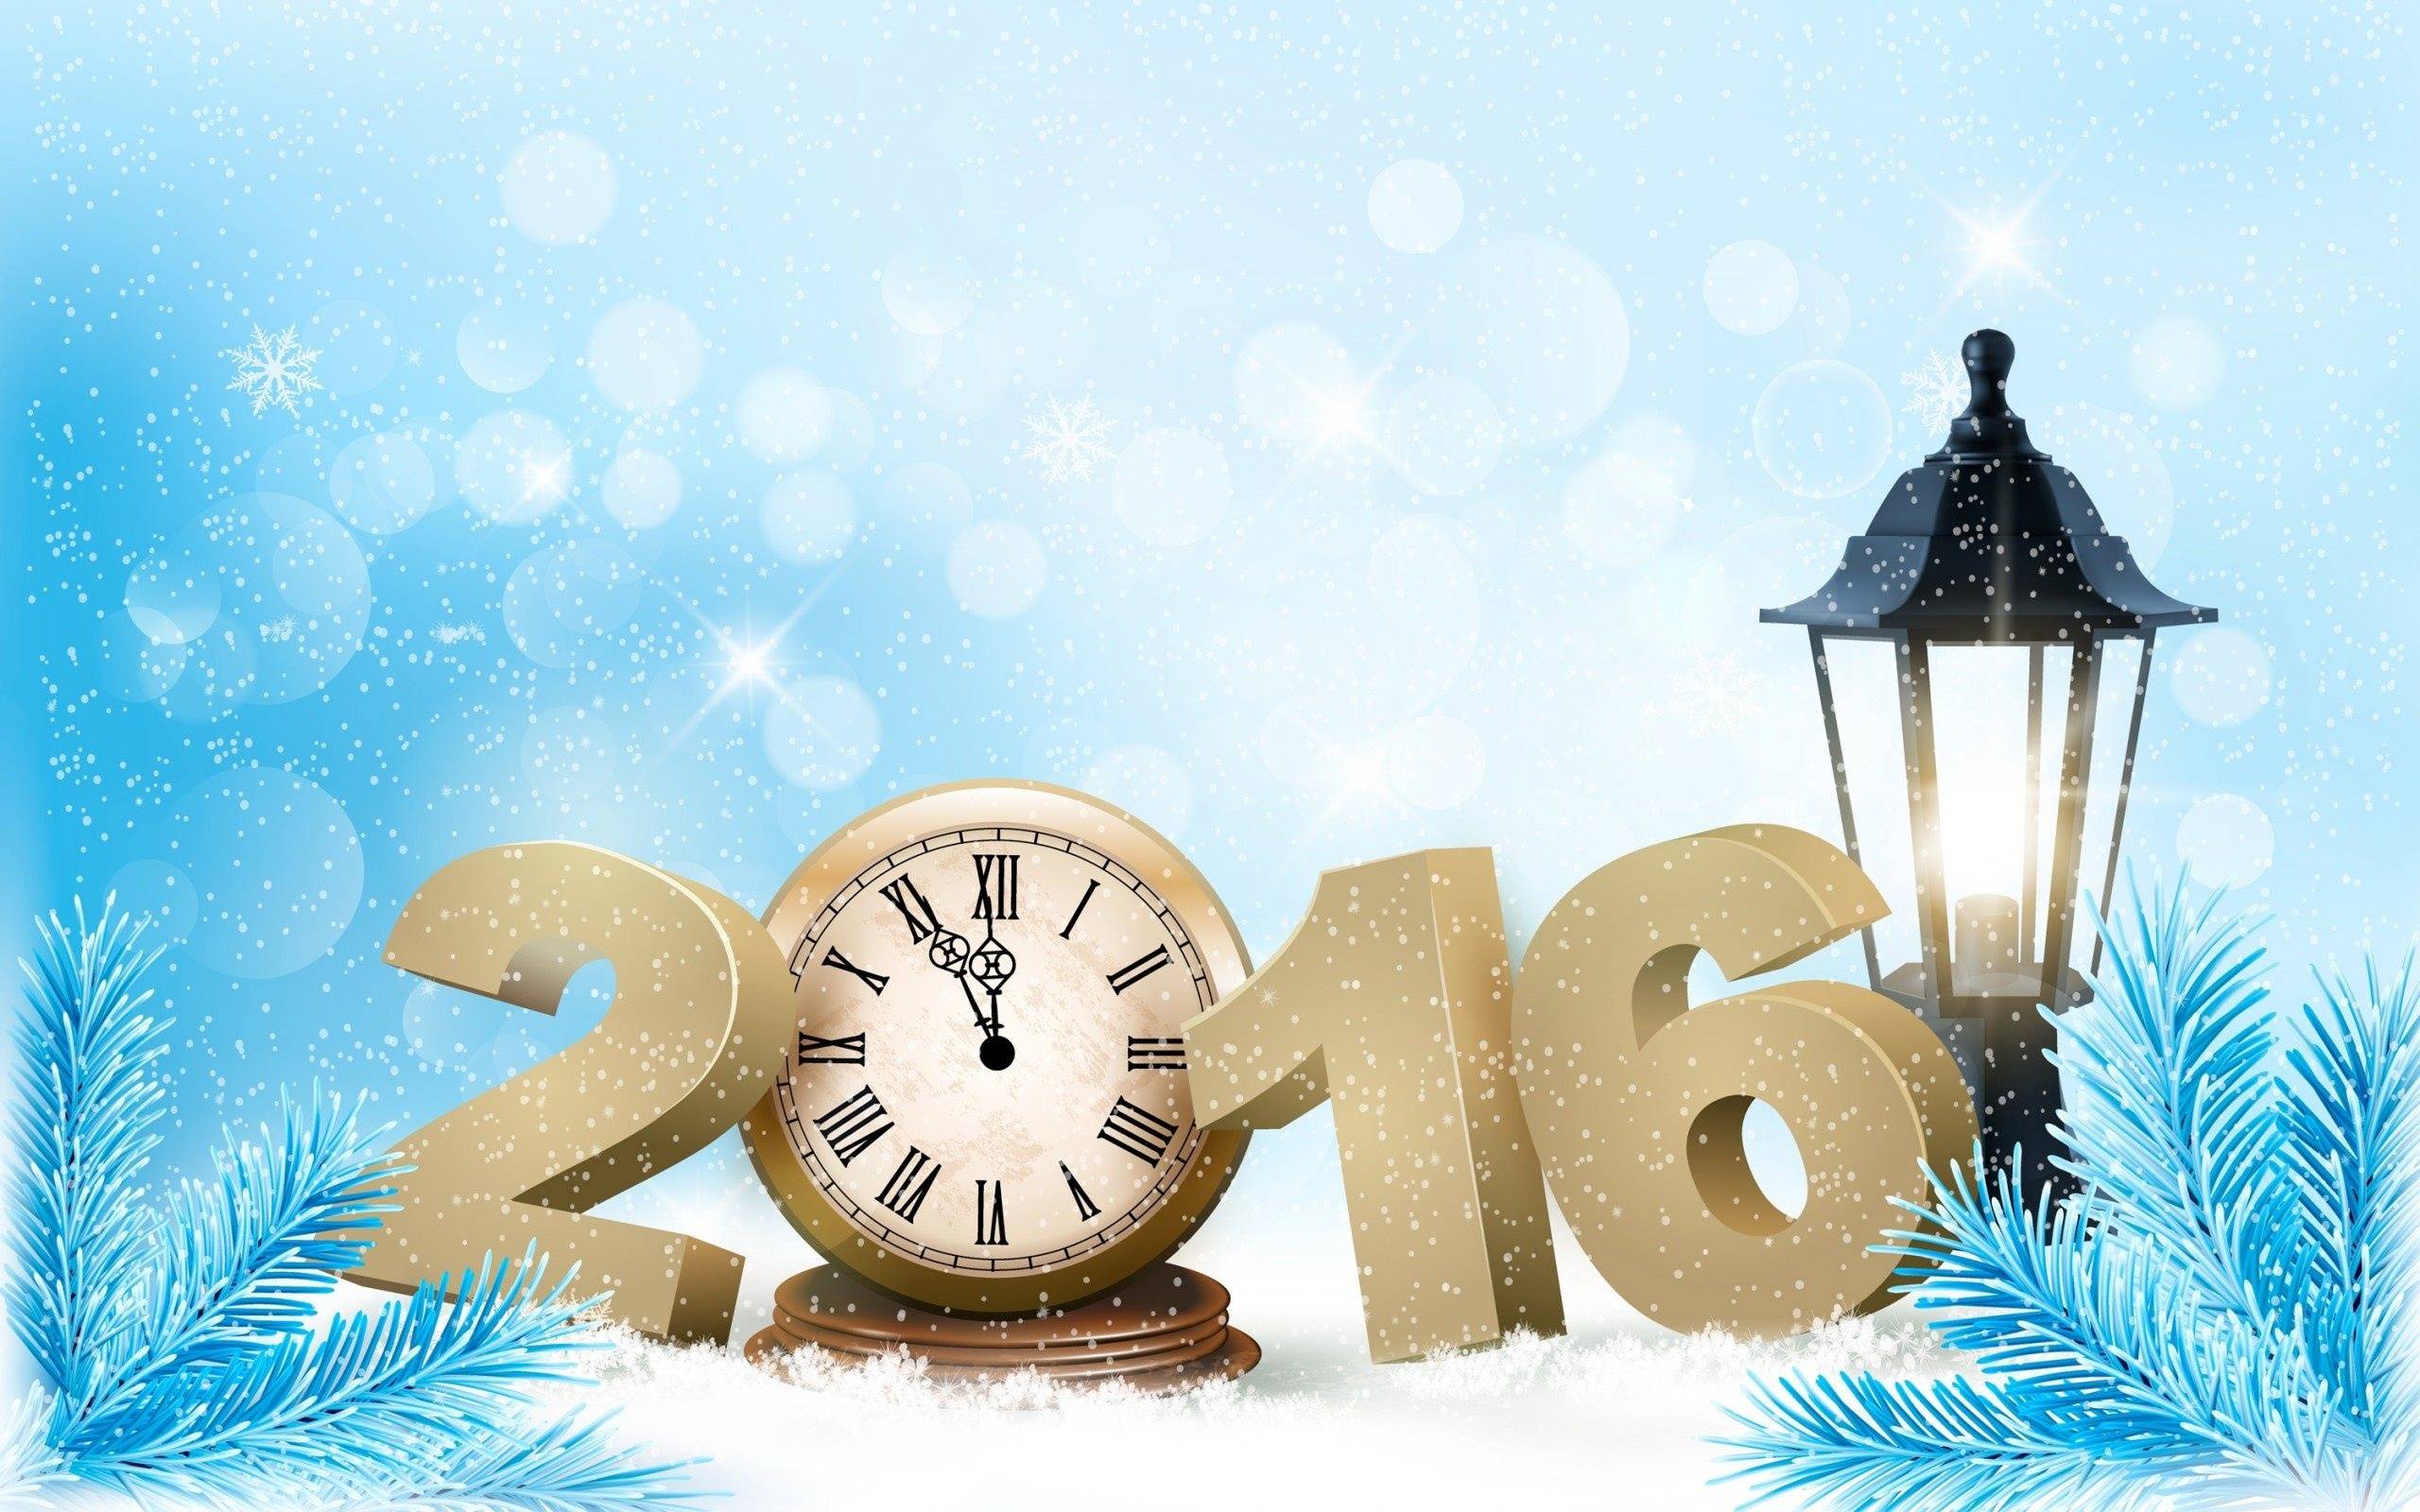 Wallpapers new year picture 2016 alarm clock on the desktop